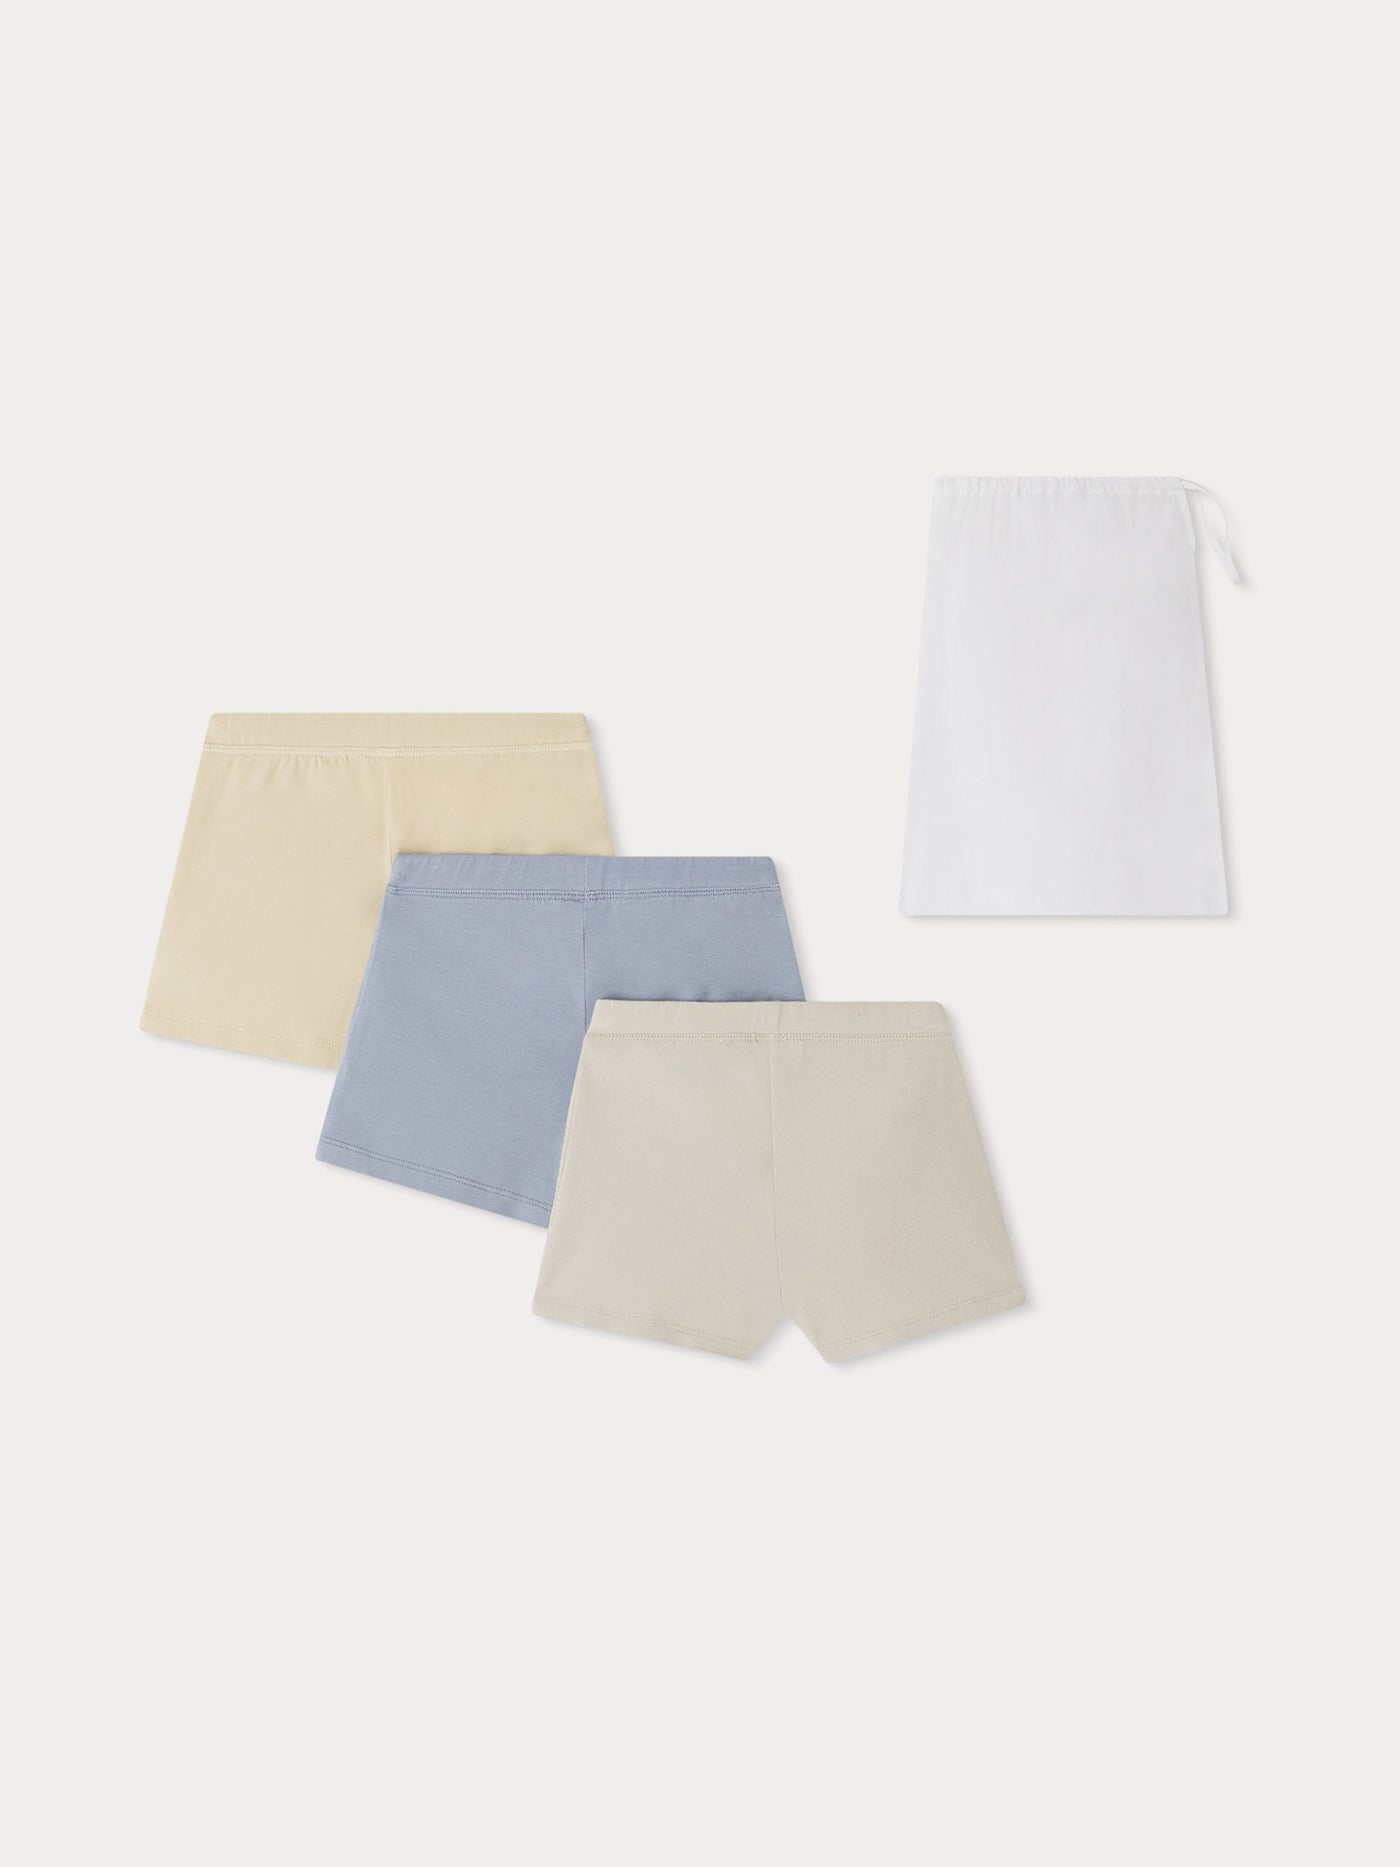 Pack of Acal Boxer Shorts gray blue